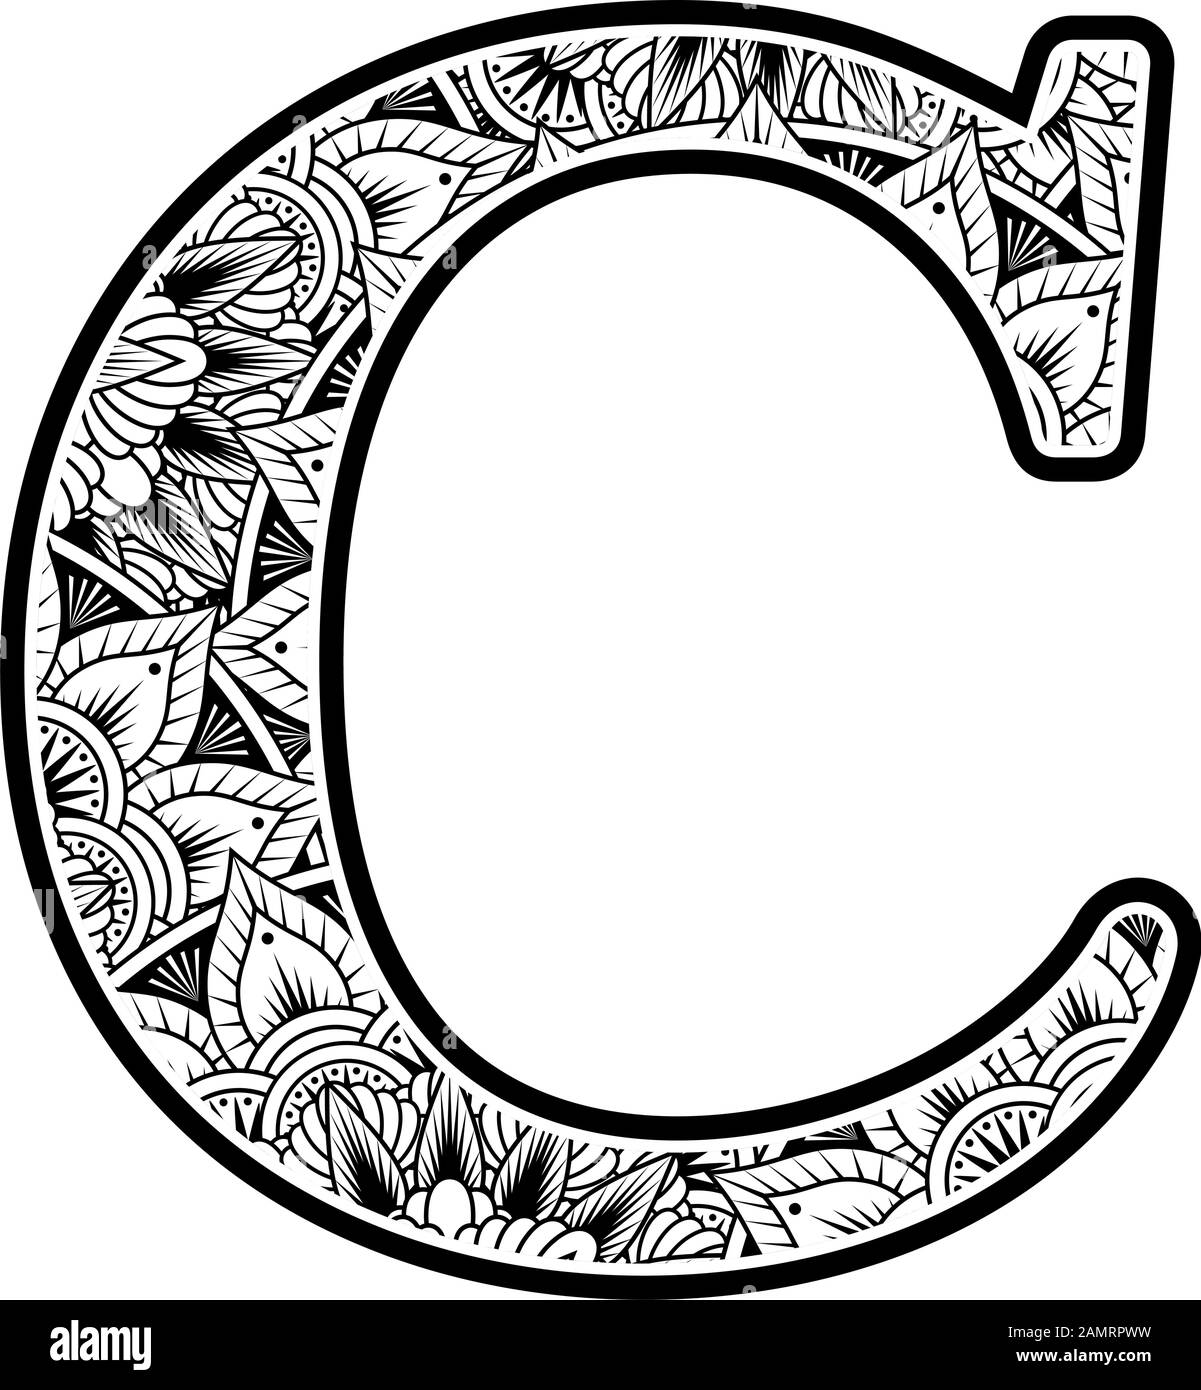 capital letter c with abstract flowers ornaments in black and white. design inspired from mandala art style for coloring. Isolated on white background Stock Vector